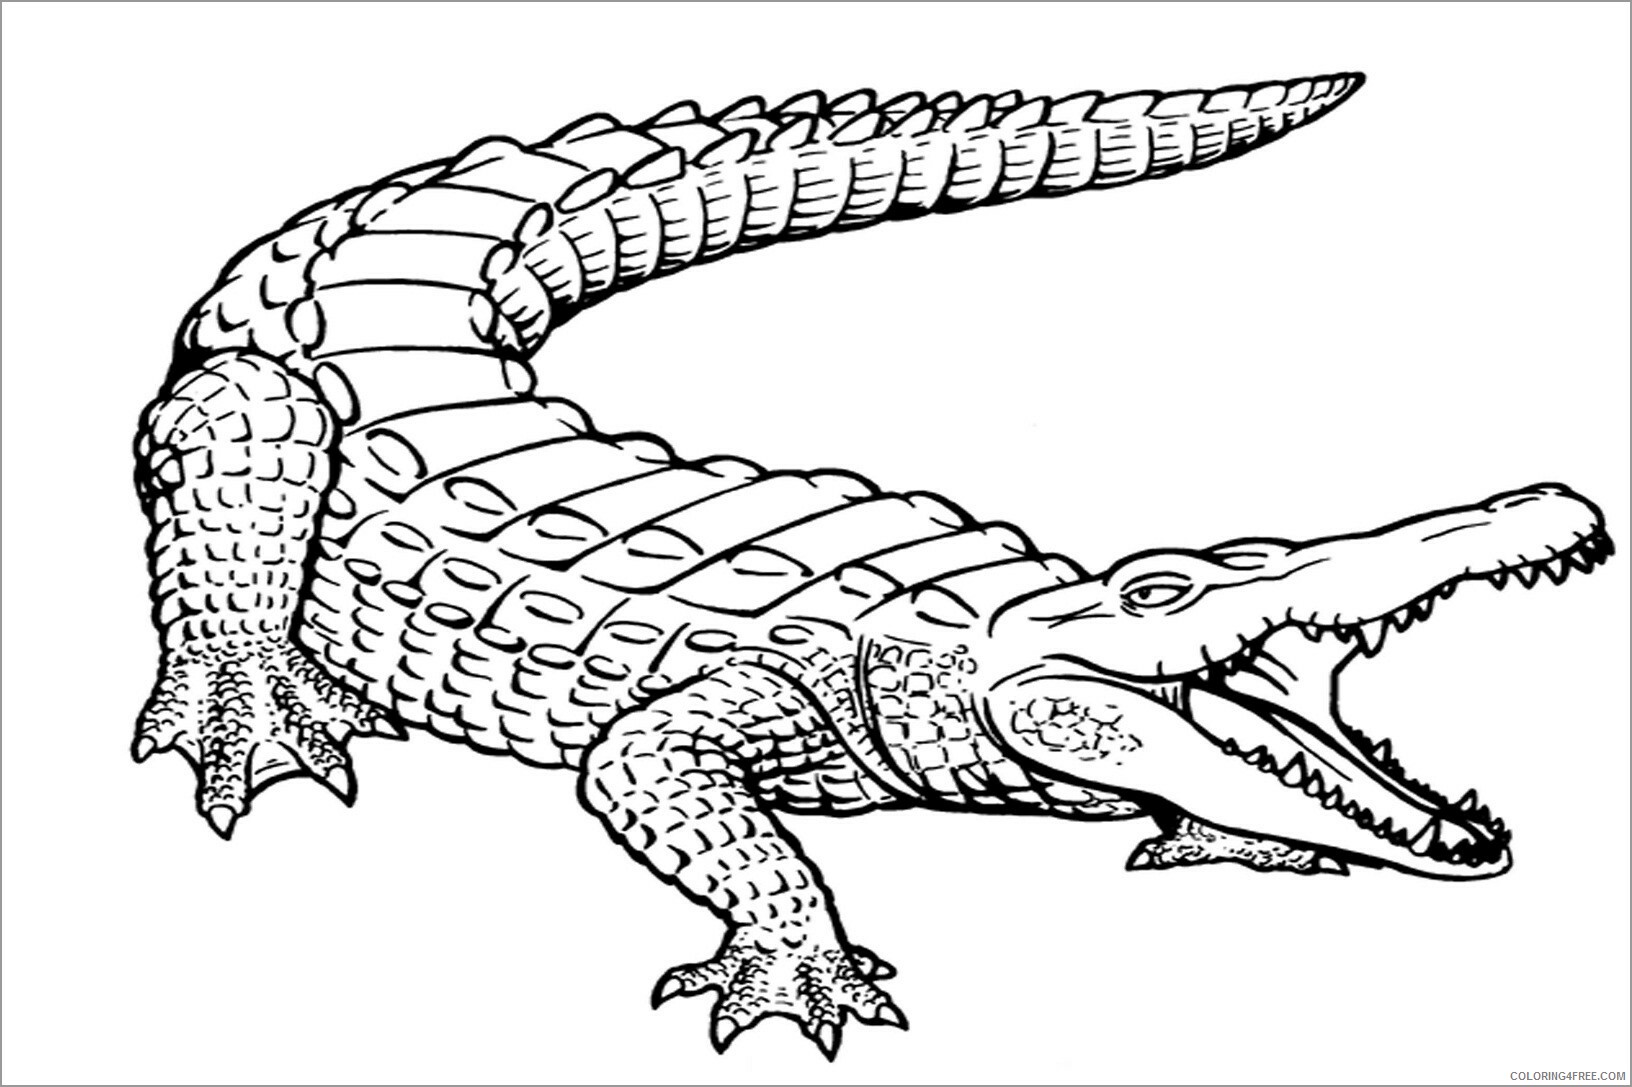 Alligator Coloring Pages Animal Printable Sheets realistic alligators 2021 0071 Coloring4free